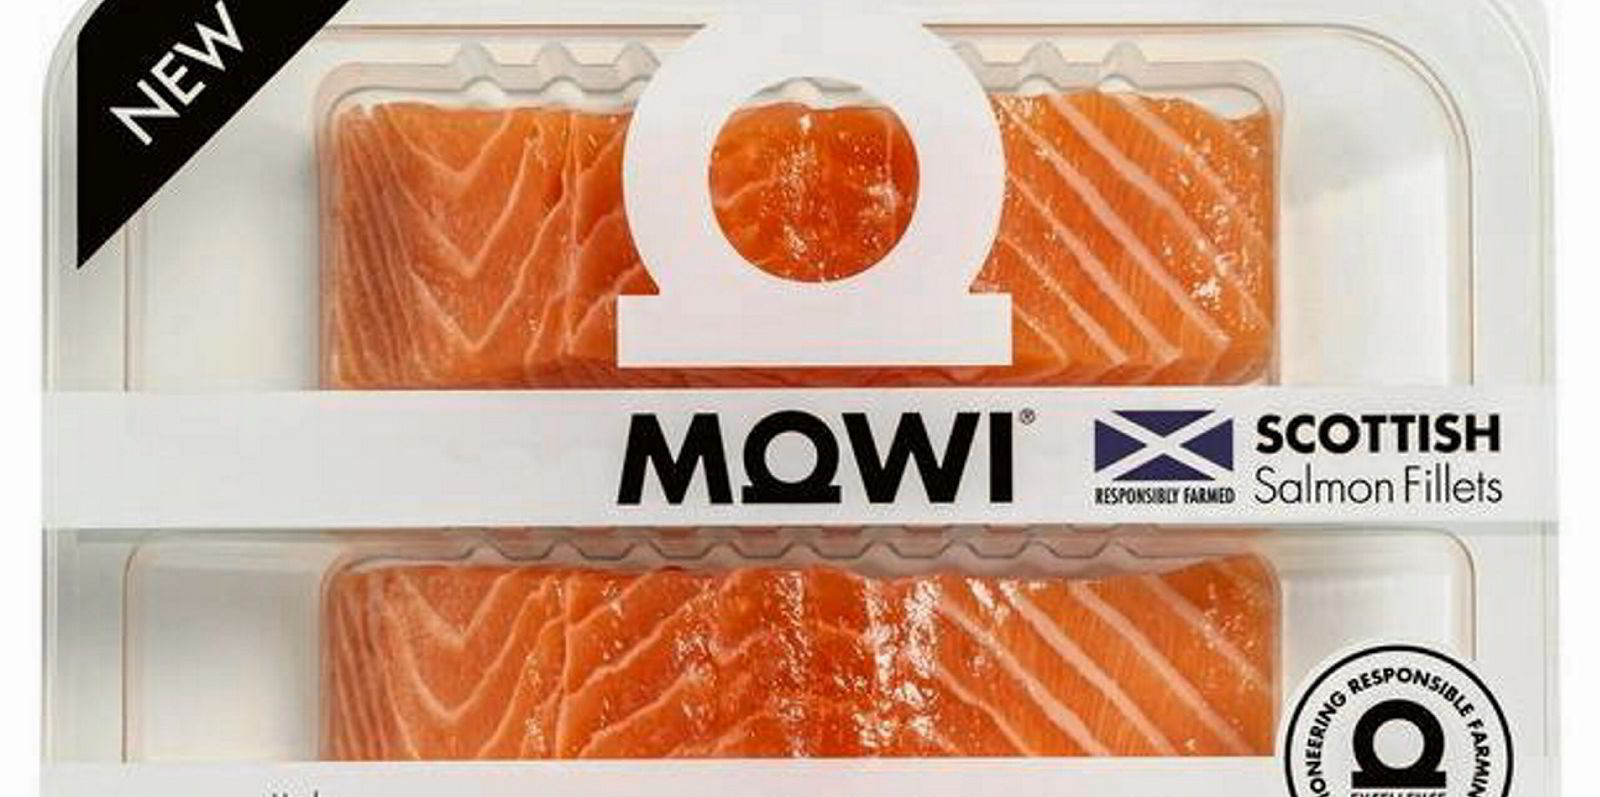 welfare reinstates supplier\'s eco-label M&S salmon RSPCA farmed following investigation